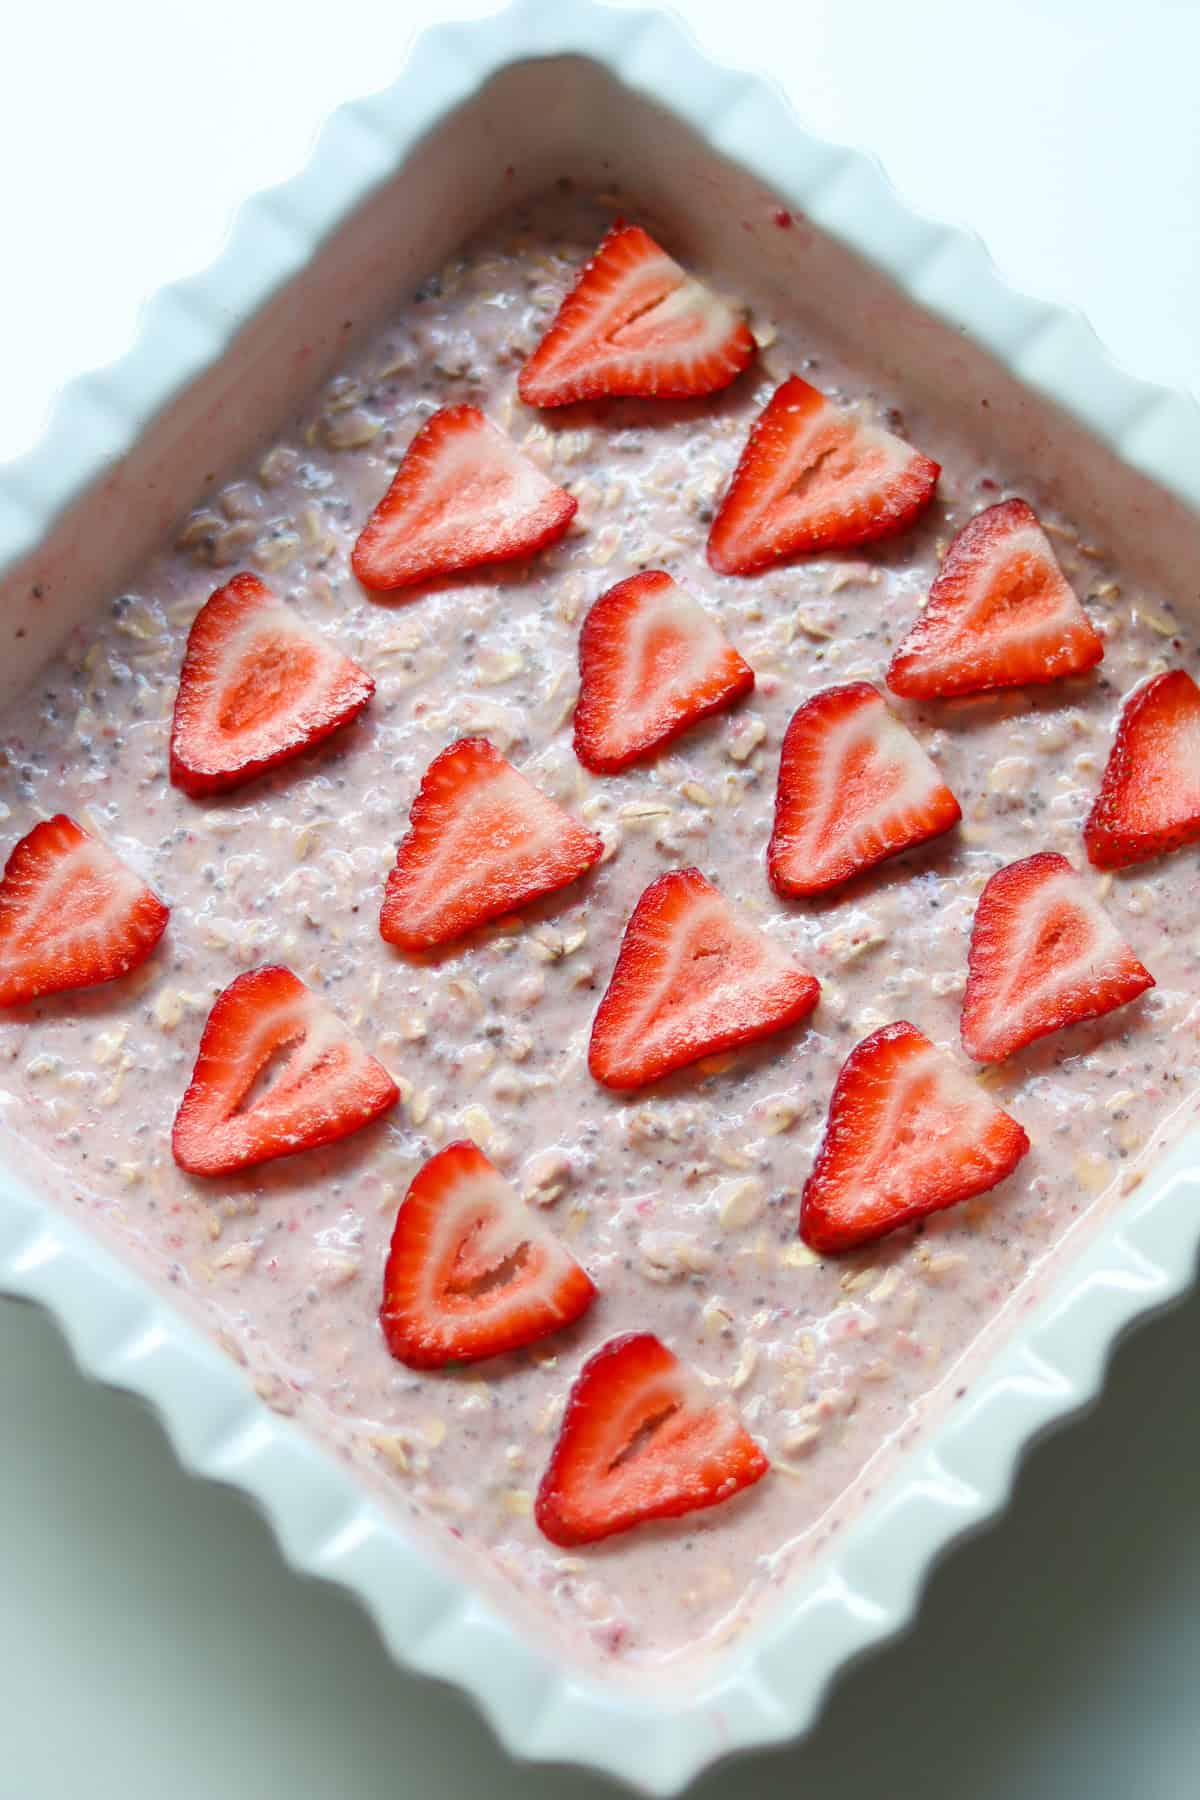 The oatmeal mixture with topped strawberries in a baking dish.